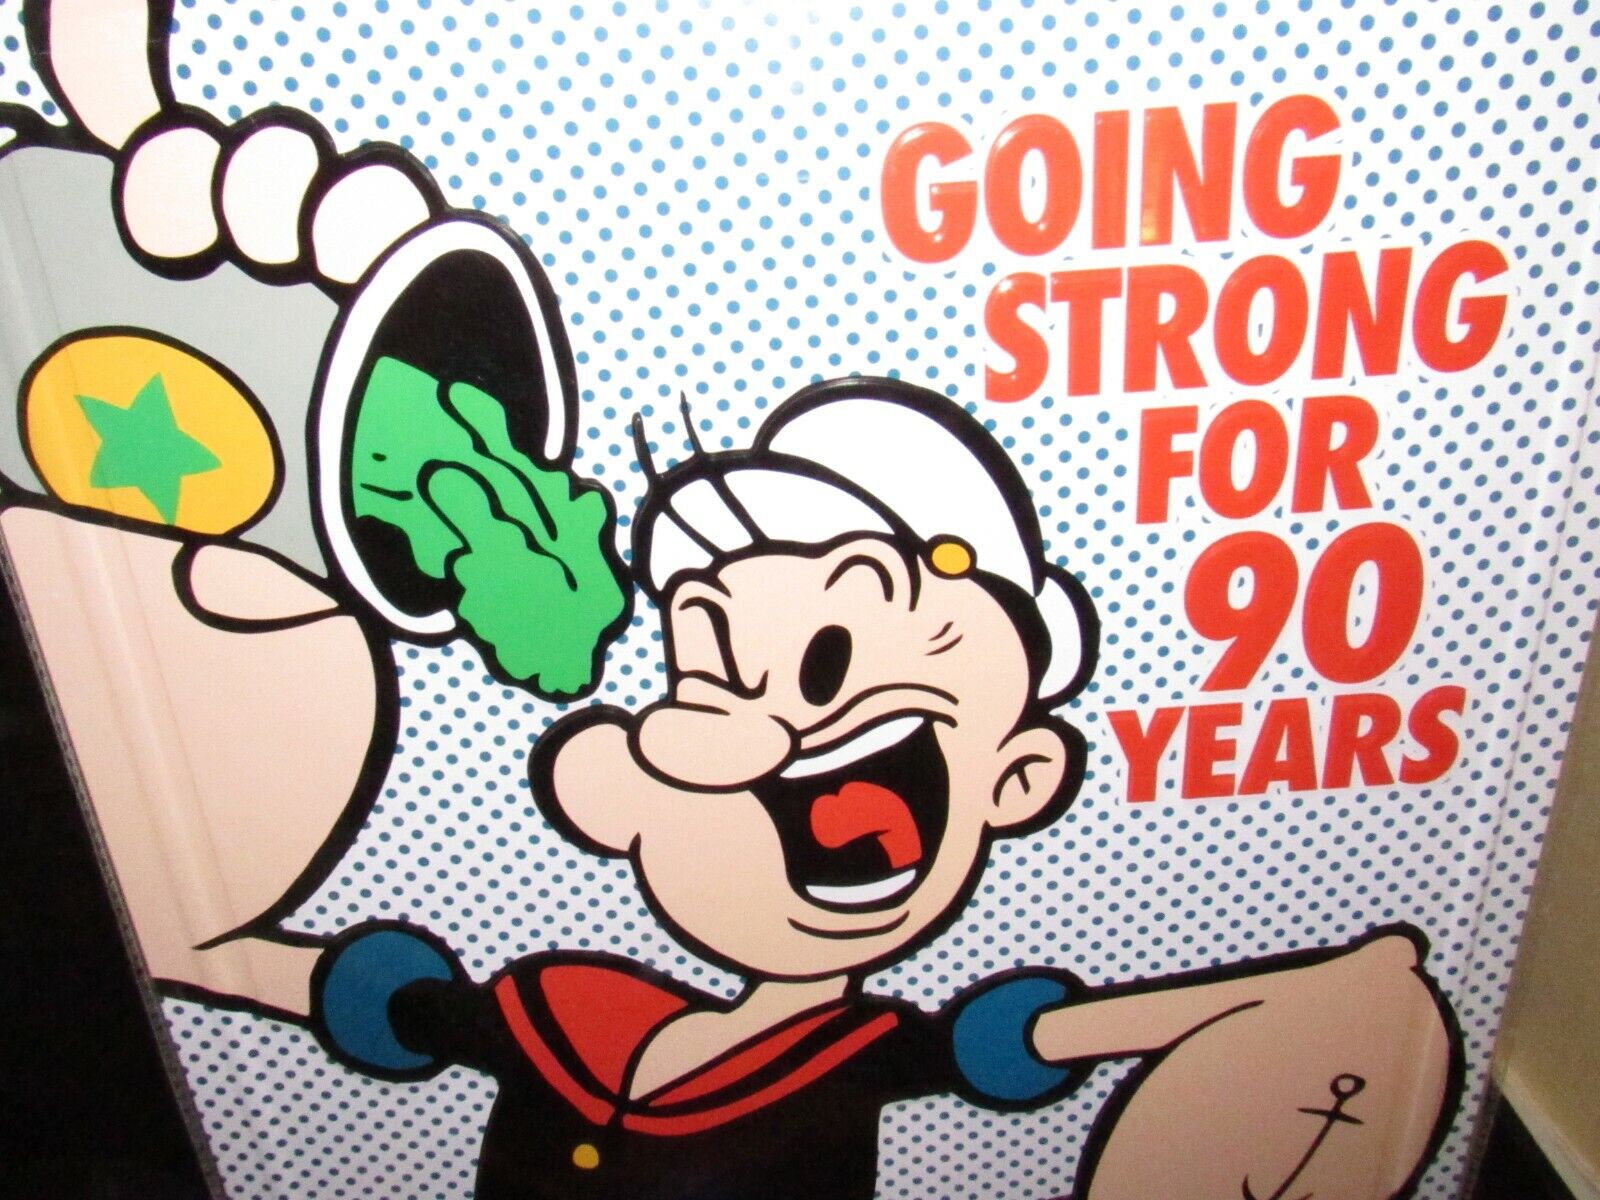 Popeye Going Strong For 90 Years Embossed Metal / Tin Sign, Brand NEW